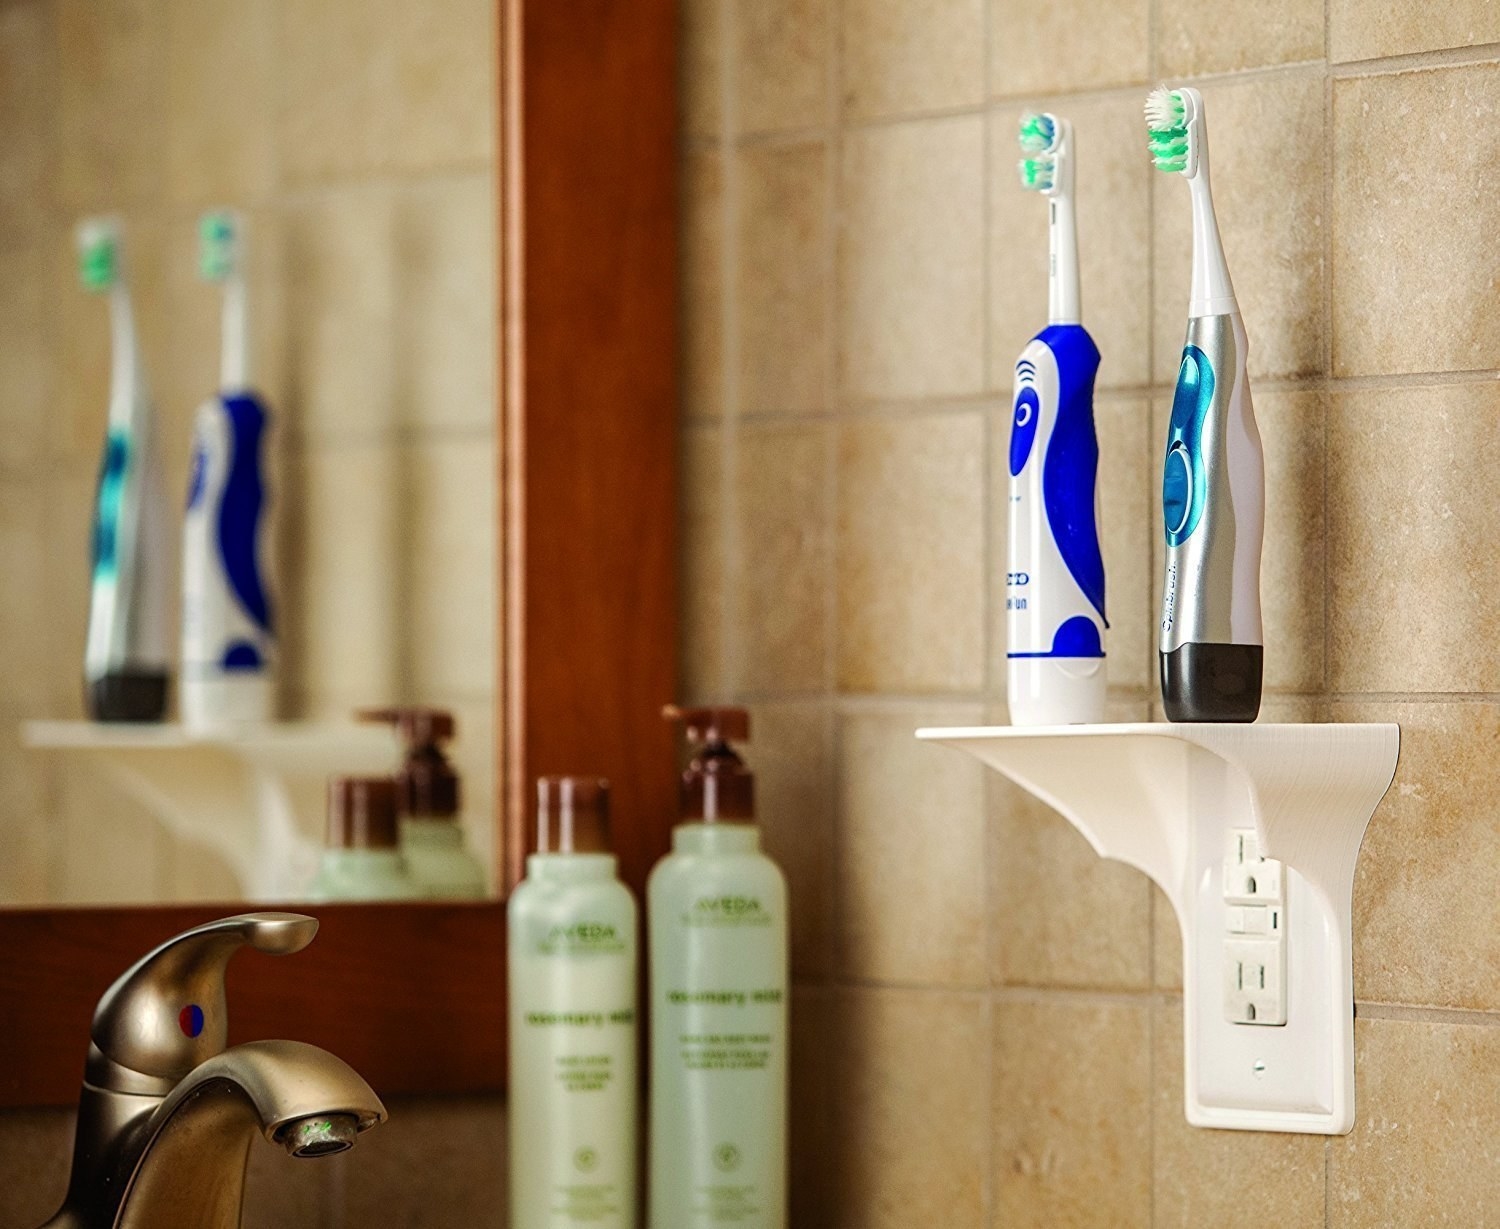 Two electric toothbrushes sitting on a small shelf above an outlet in a bathroom 